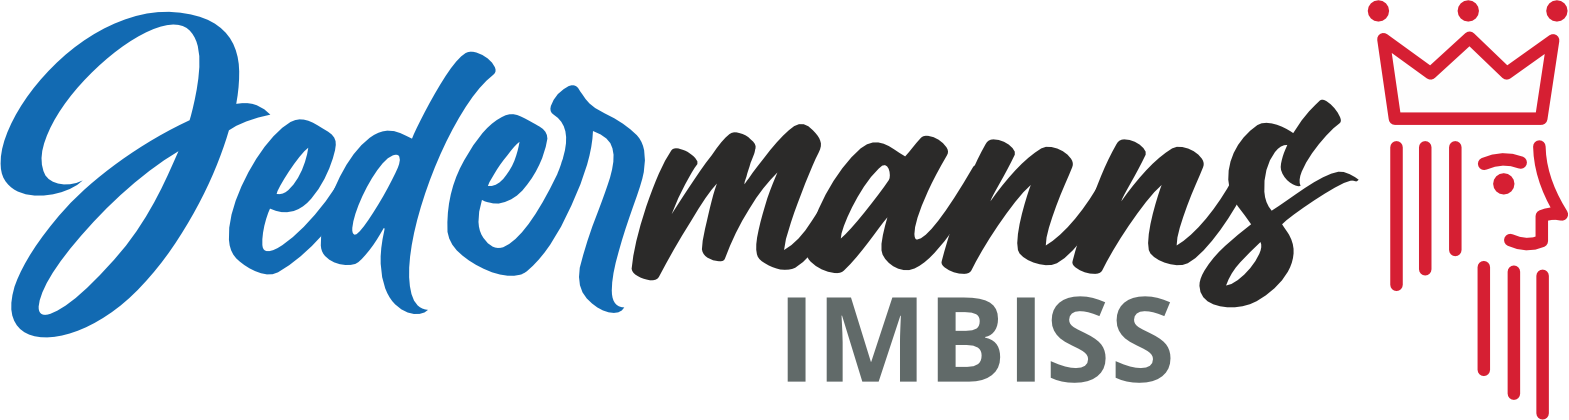 Logo Jedermanns Therme Imbiss